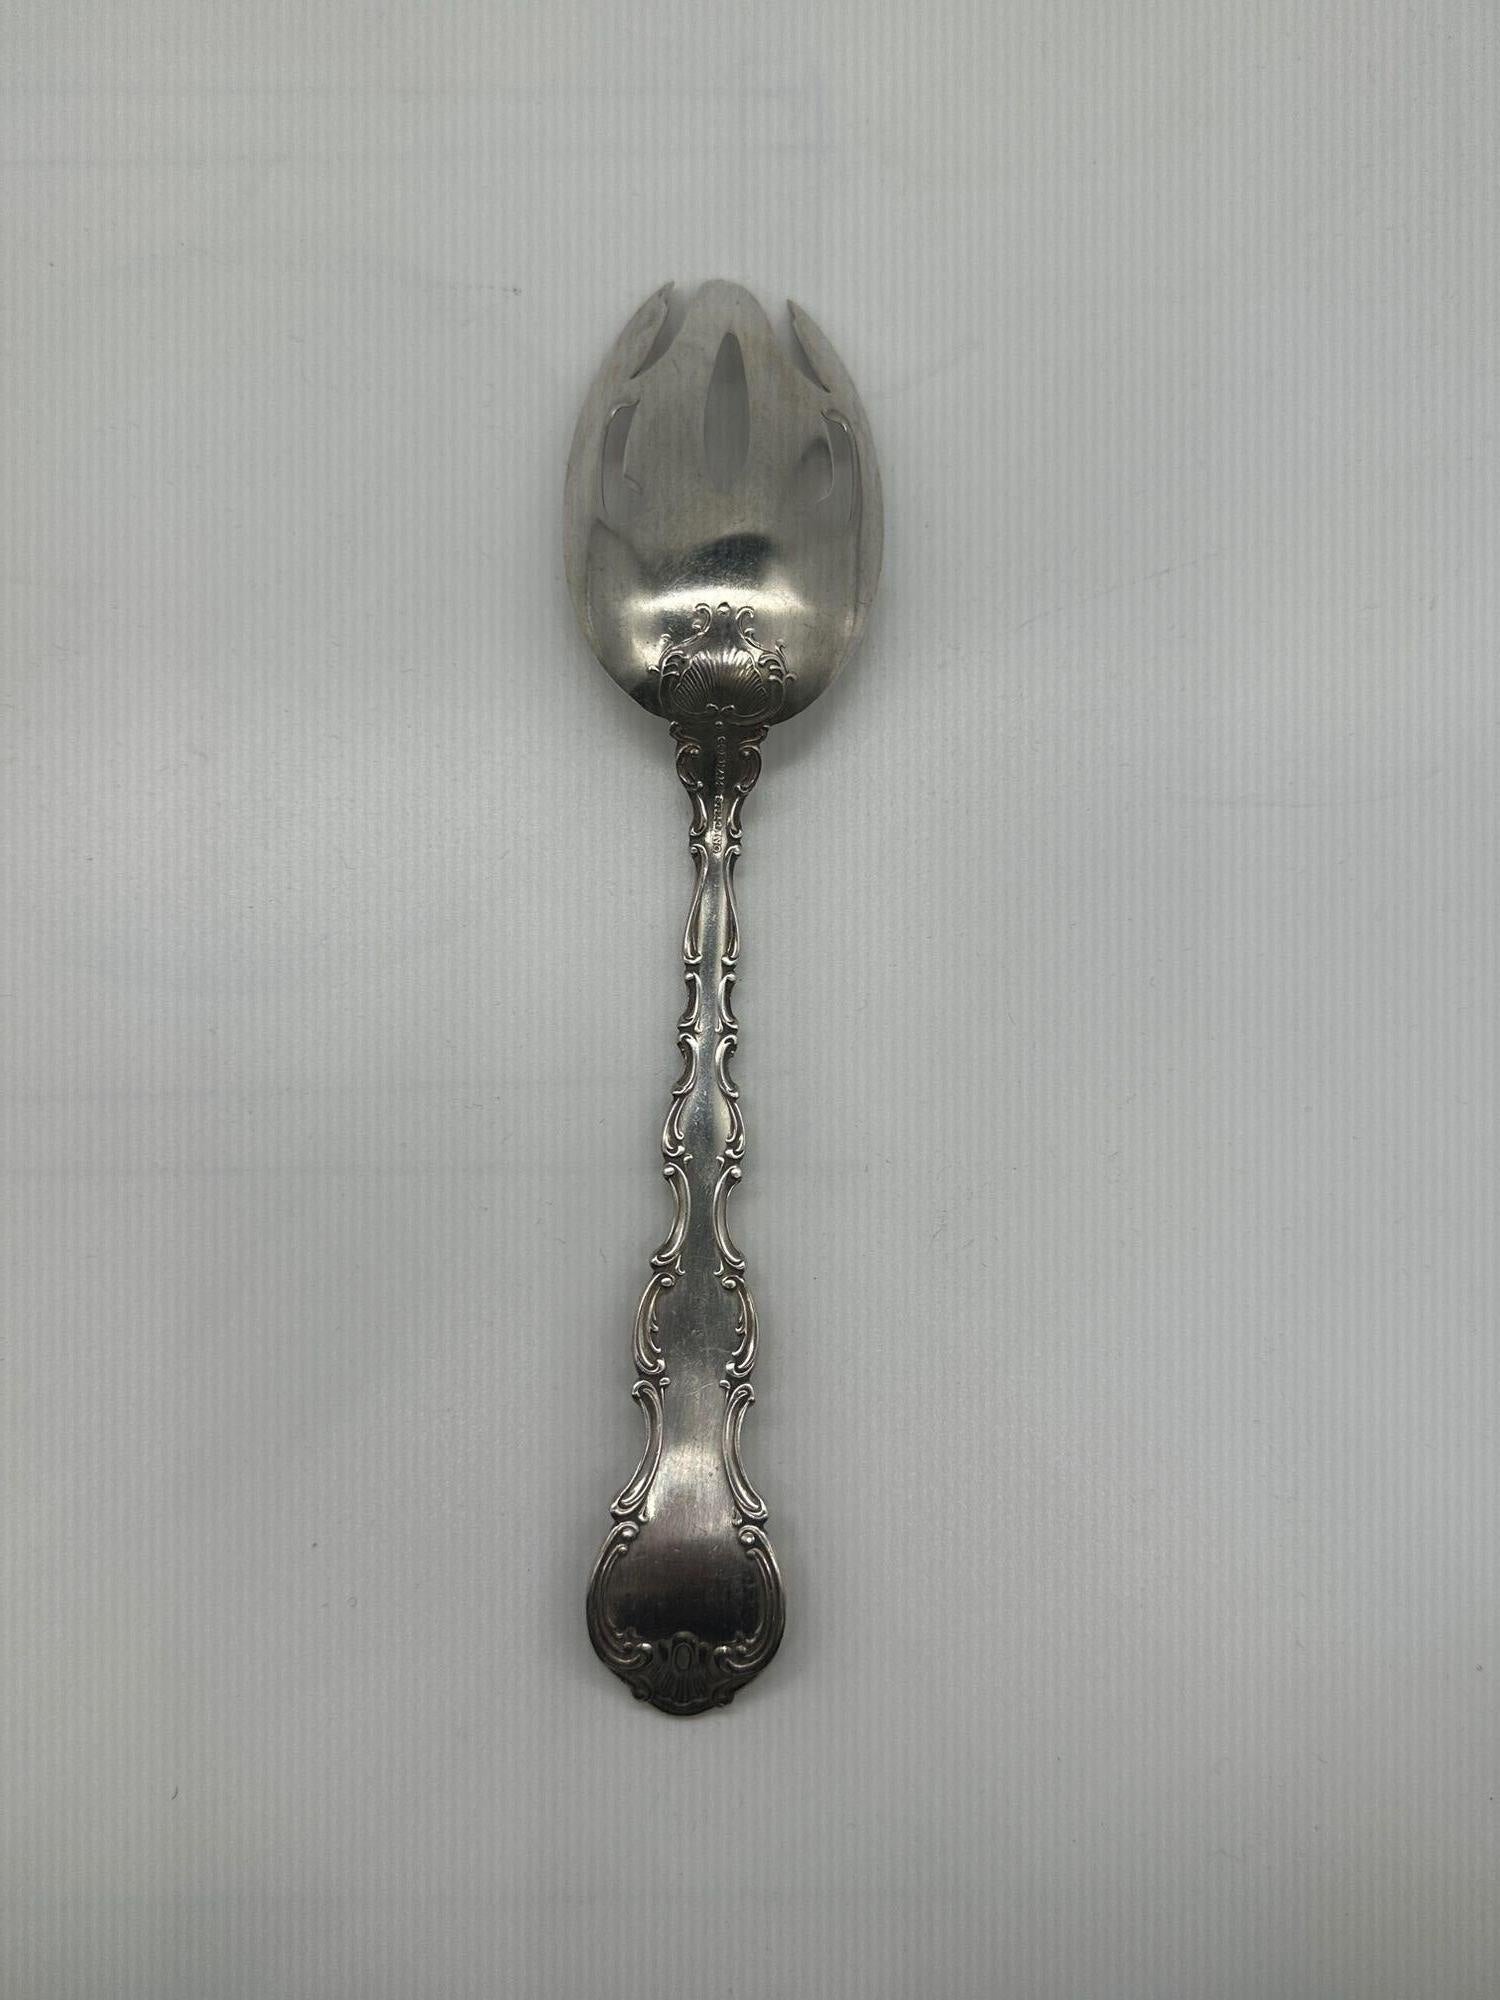 19th Century Strasbourg Gorham Sterling Silver Serving Spoon w/ Pierced Bowl & Tines For Sale